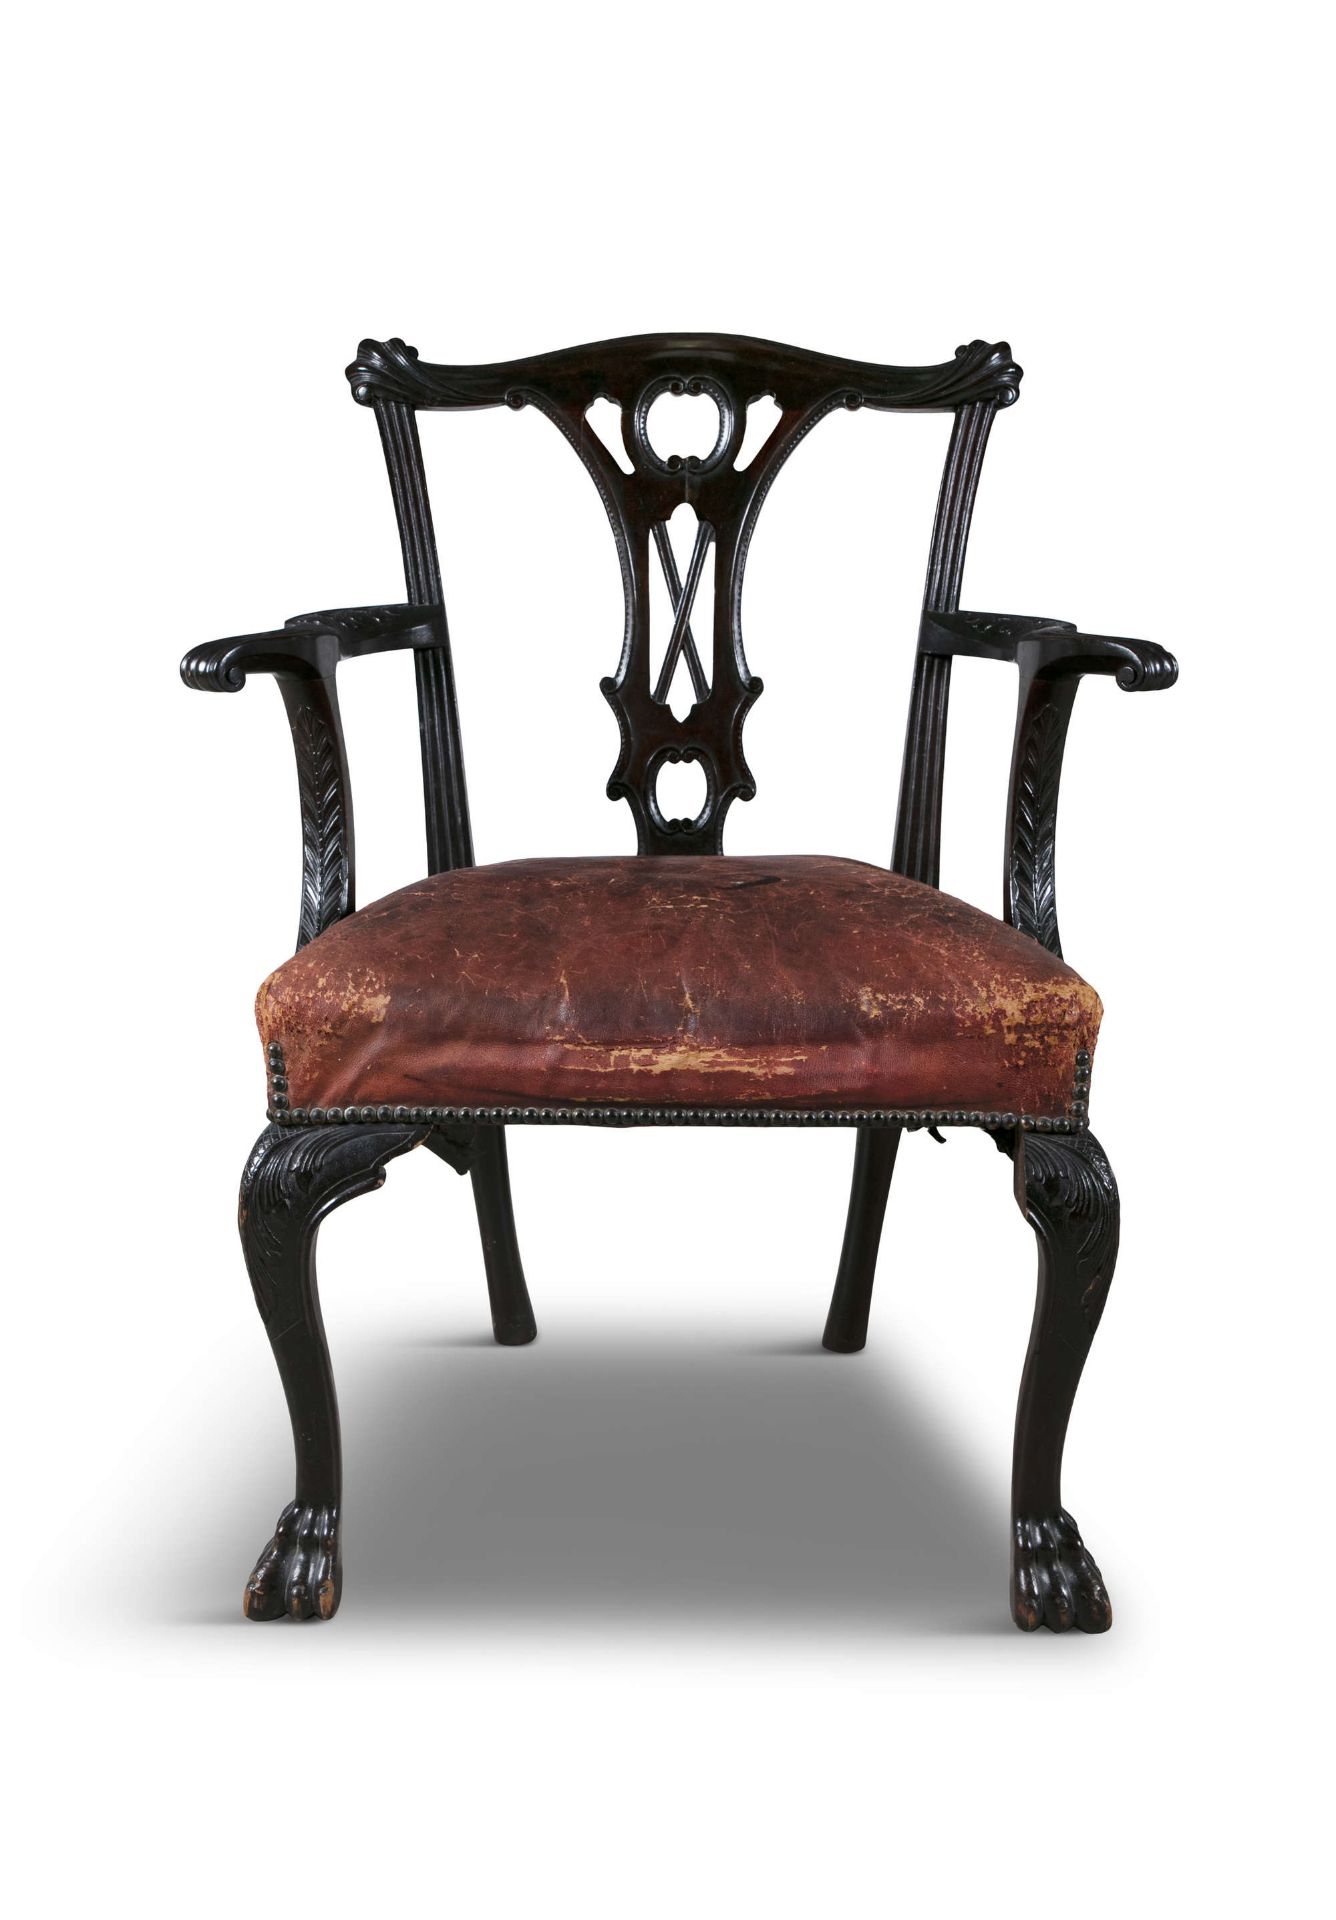 PAIR DUBLIN CHIPPENDALE ELBOW CHAIRS - Image 3 of 3